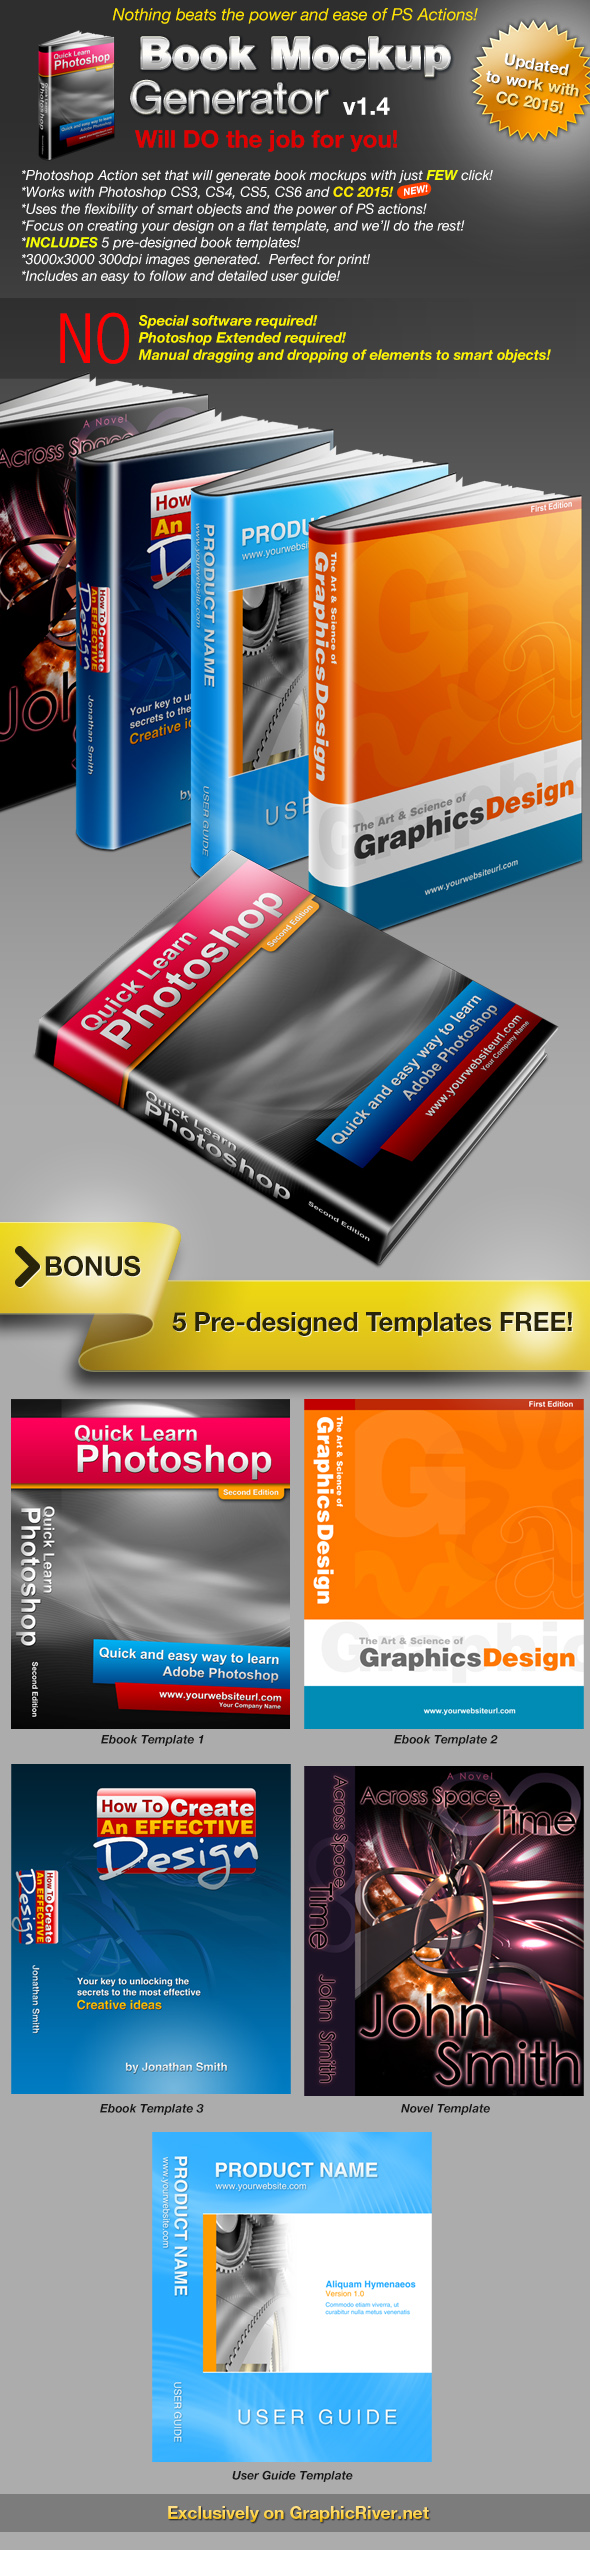 Download Ebook Mockup Graphics Designs Templates From Graphicriver